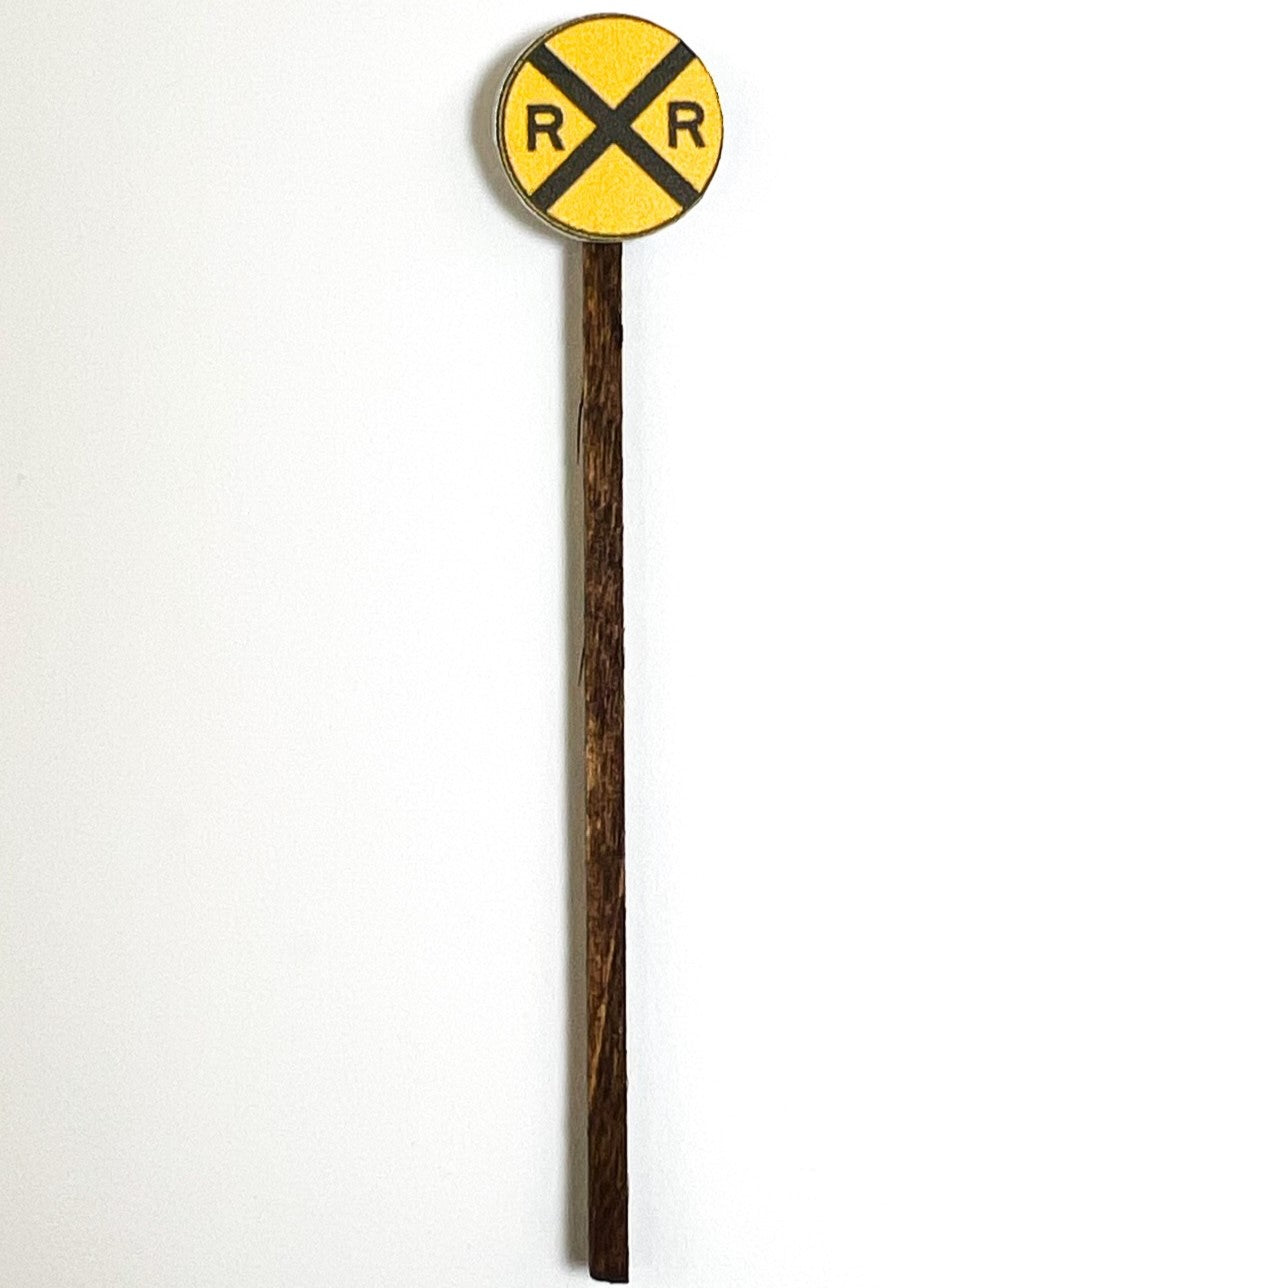 Model Railroad Grade Crossing Advance Warning Sign, R X R yellow circle brown post. HO Gauge, HO Scale